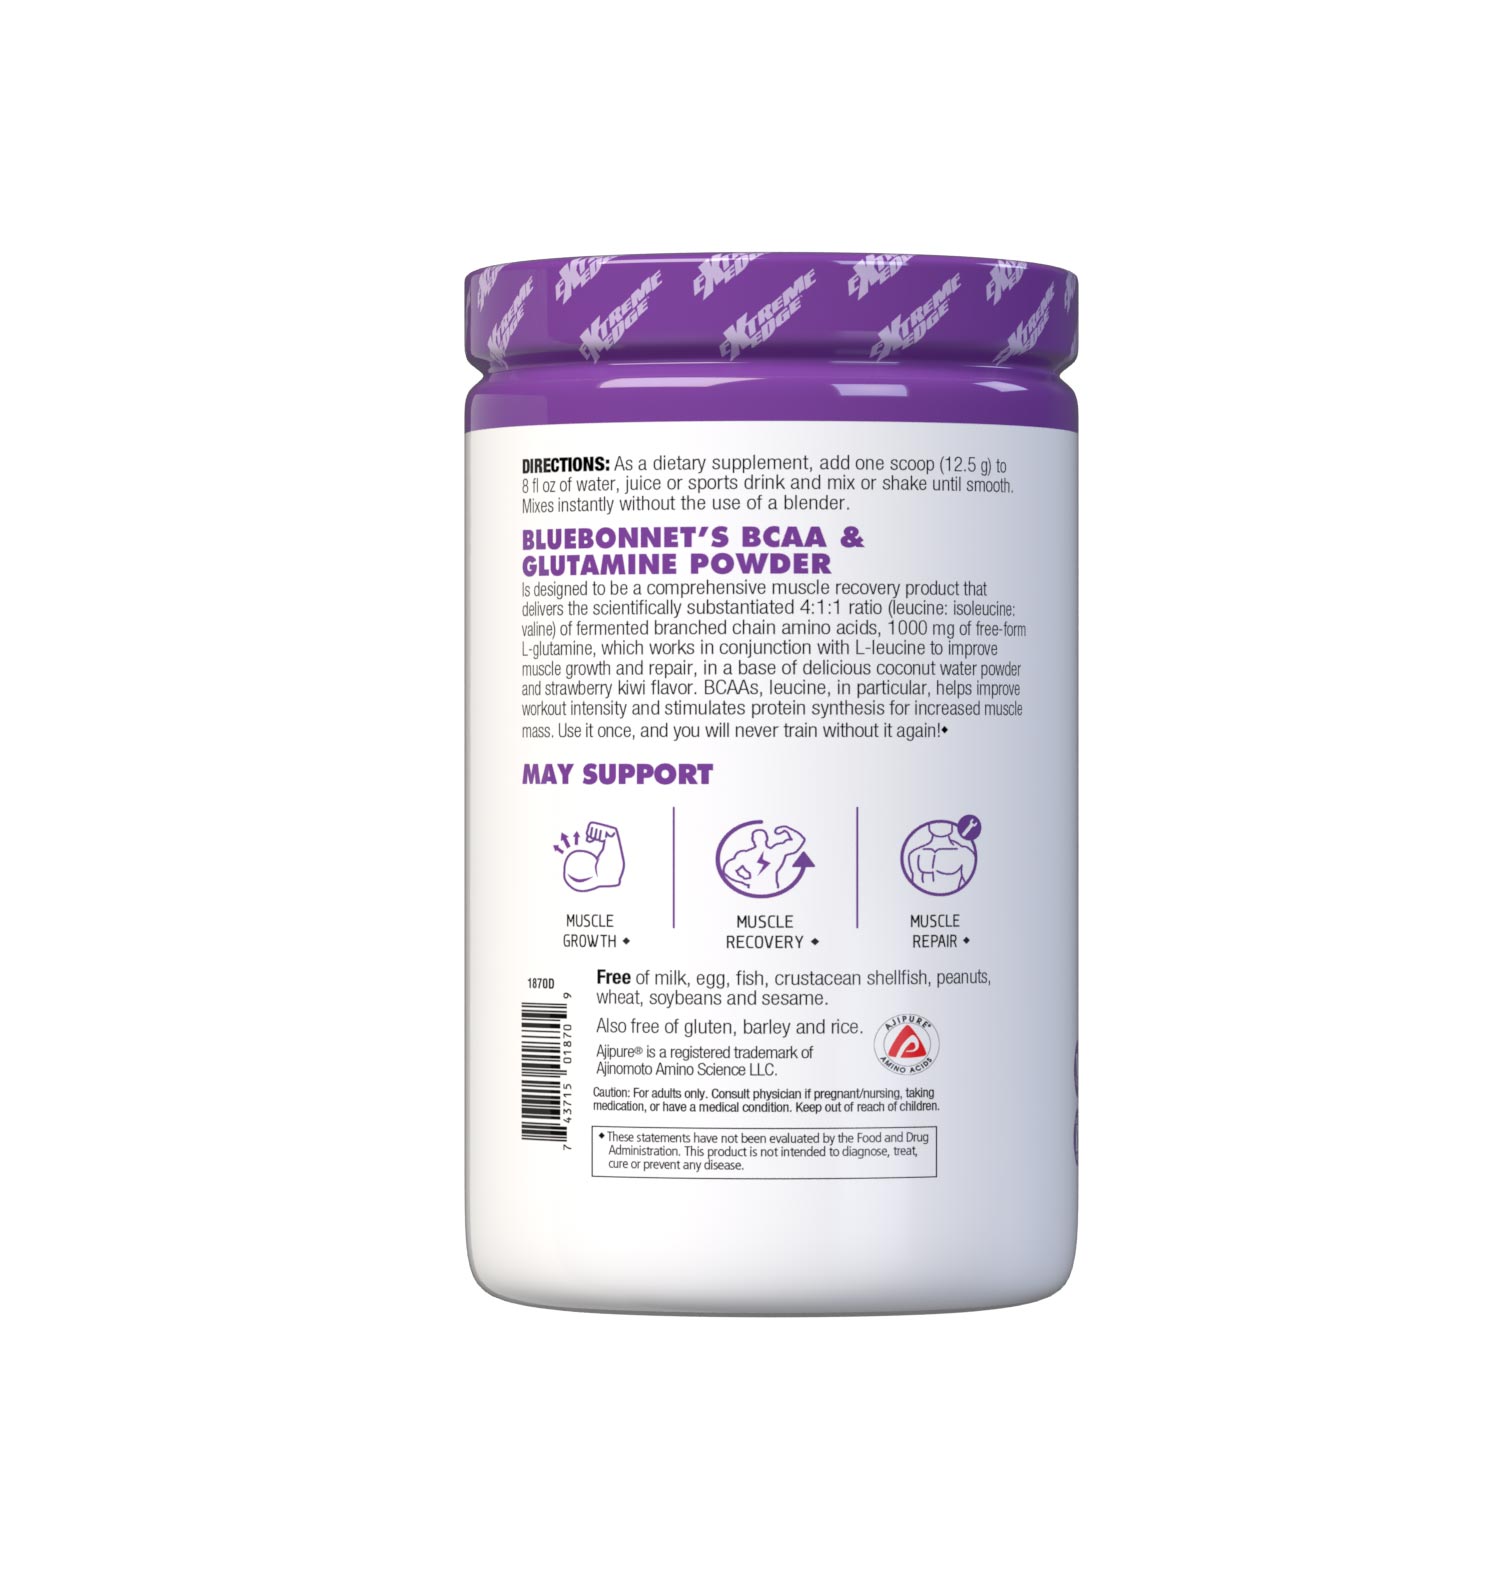 BCAA and Glutamine features the scientifically substantiated 4:1:1 ratio (leucine: isoleucine: valine) of fermented branched chain amino acids plus 1000 mg of free-form L-glutamine, which works in conjunction with L-leucine to improve muscle growth and repair. Fermented BCAA uses only vegetable-based sources, making it a cleaner, superior product. BCAA, leucine in particular, helps improve workout intensity and stimulates protein synthesis for increased muscle mass. Description panel. #size_13.23 oz